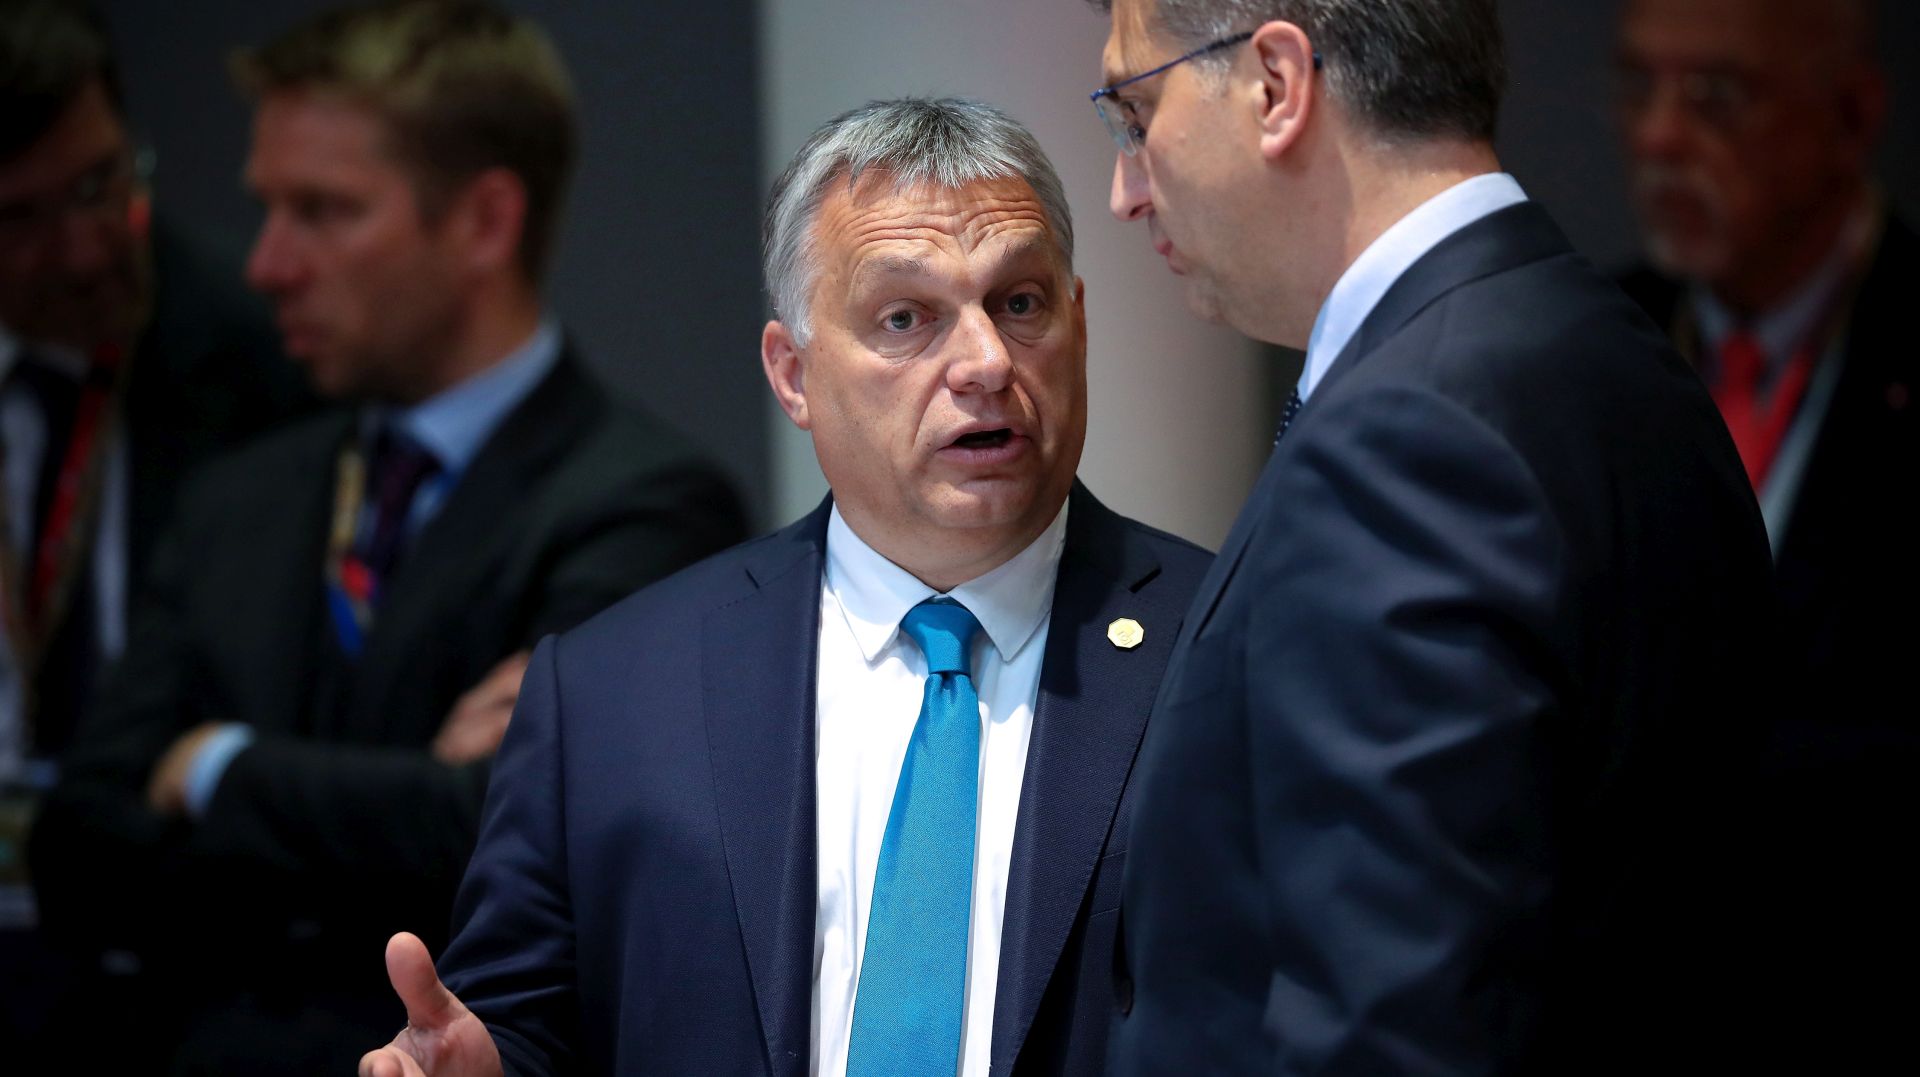 epa07608632 Hungarian Prime Minister Viktor Orban (L) and Croatian Prime Minister Andrej Plenkovic (R) during the round table of a special EU summit in Brussels, Belgium, 28 May 2019. Two days after the European Parliament elections, EU heads of state or government will gather for a summit to discuss the outcome of the vote and start the nomination process for the heads of the EU institutions.  EPA/Francisco Seco / POOL